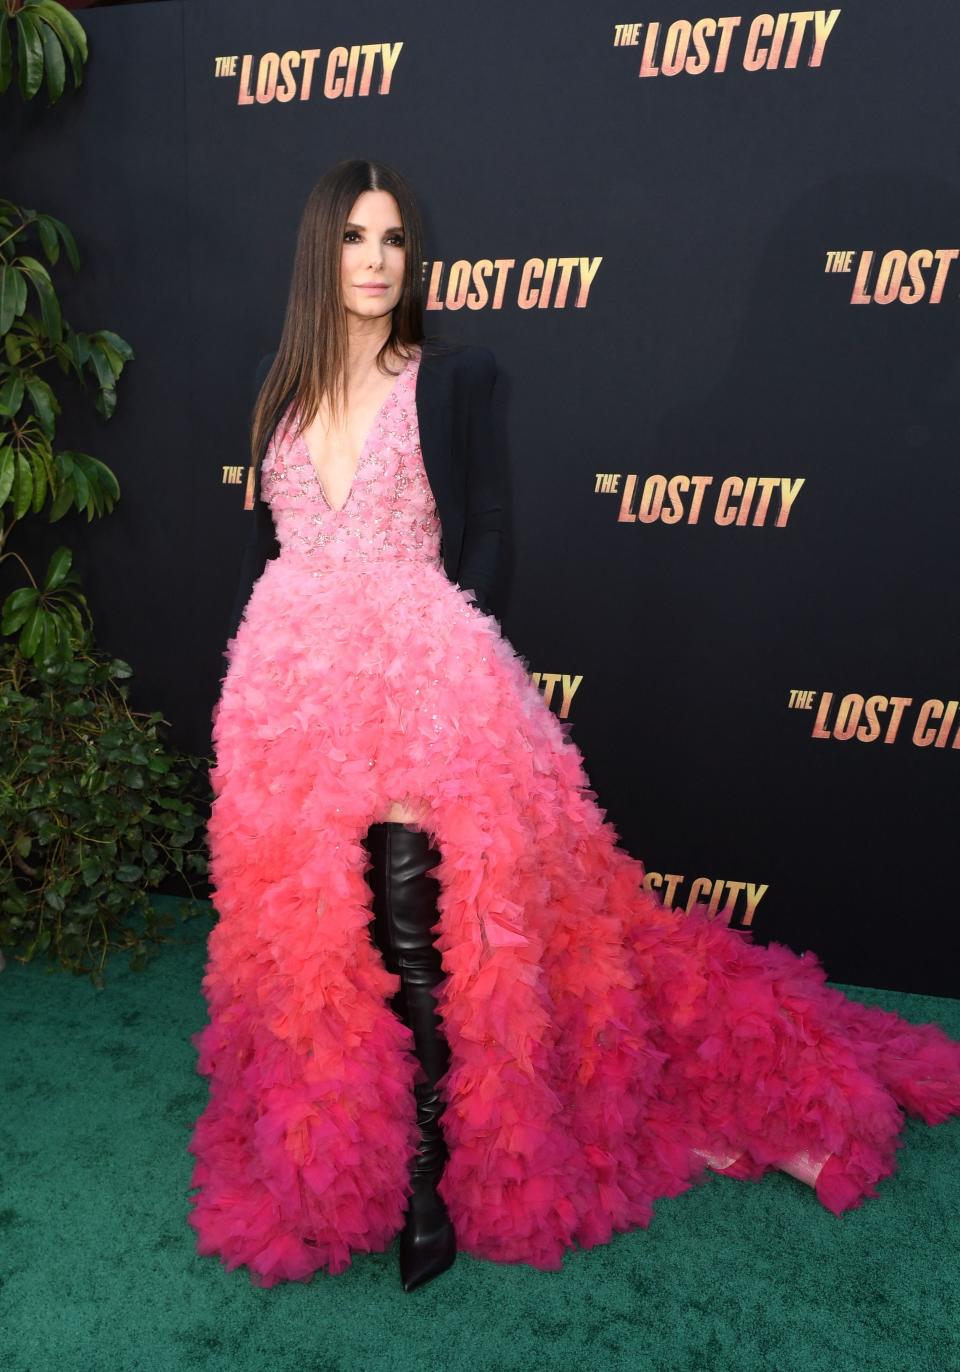  March 21, 2022 : Actress Sandra Bullock arrives for the Los Angeles premiere of "The Lost City" at the Regency Village theatre in Westwood, Calif.